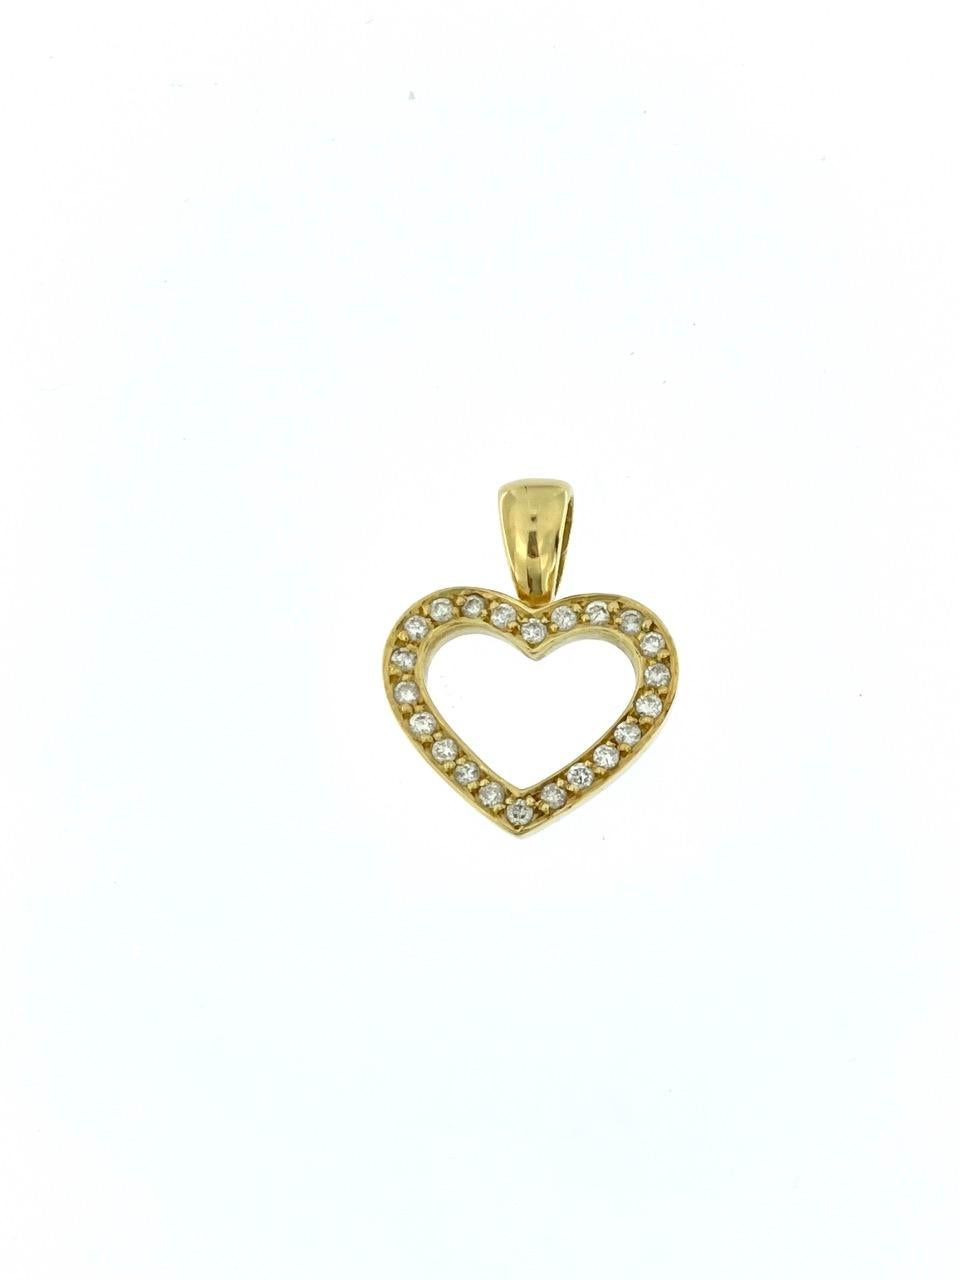 The French Yellow Gold Heart with Diamonds is a captivating and elegant piece of jewelry that combines the warmth of yellow gold with the brilliance of diamonds. This exquisite item typically features a heart-shaped design crafted from yellow gold,